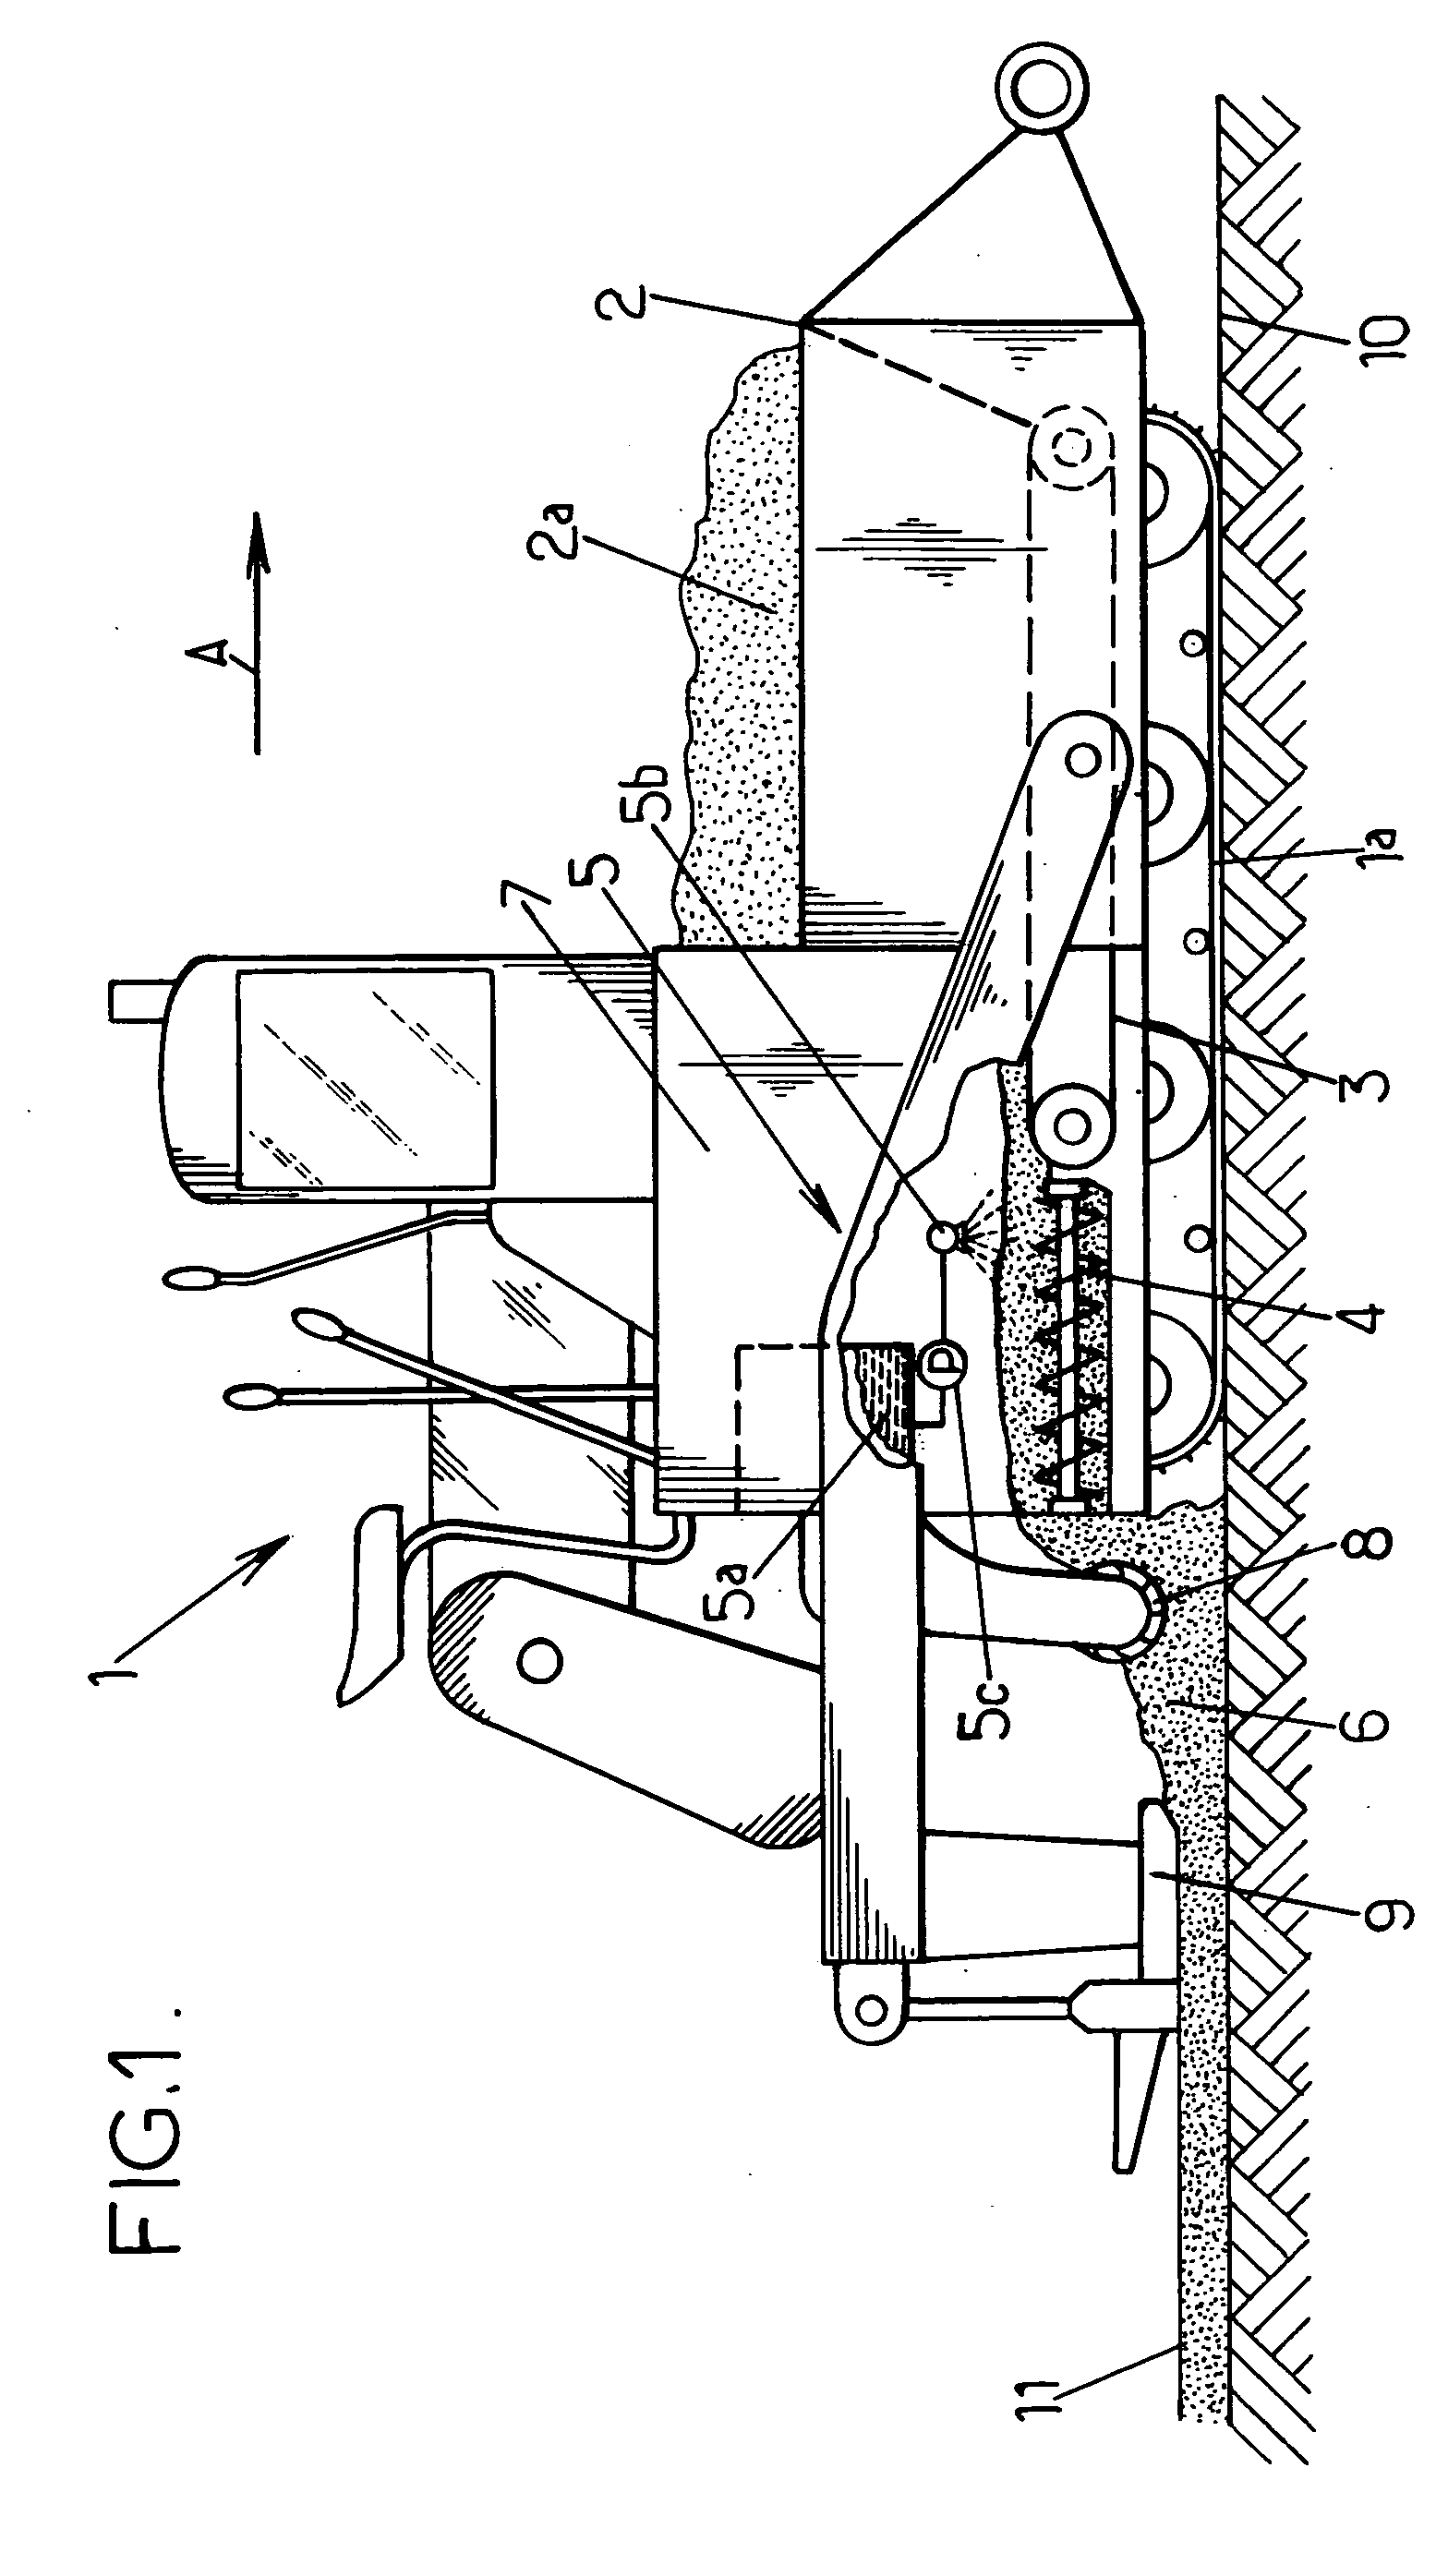 Method and apparatus for laying hot blacktop paving material